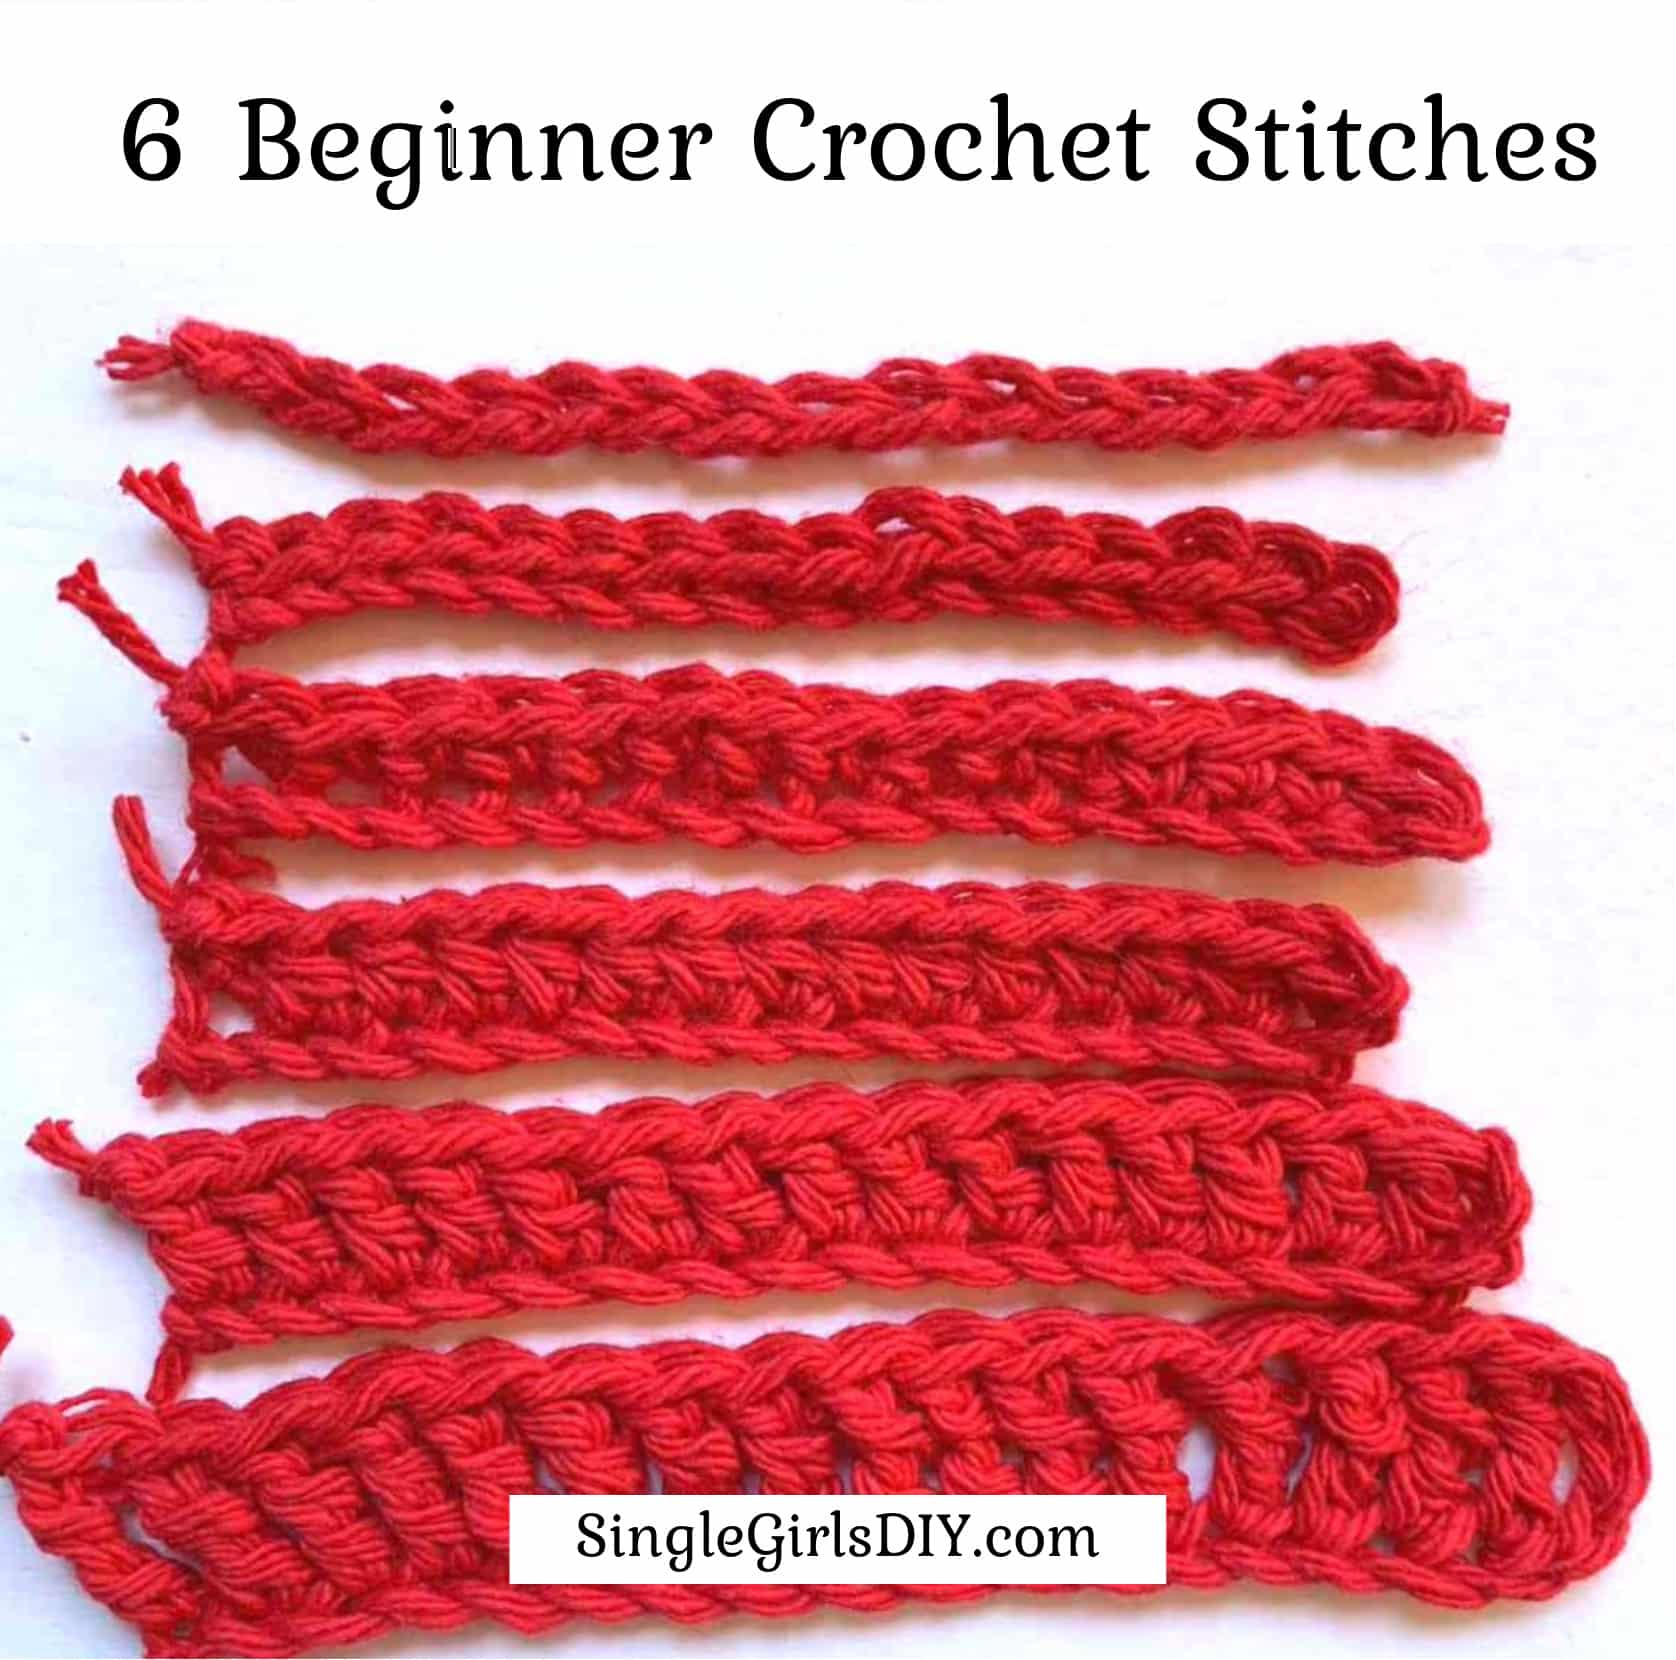 Learn how to crochet. FREE ultimate beginner's guide to crochet